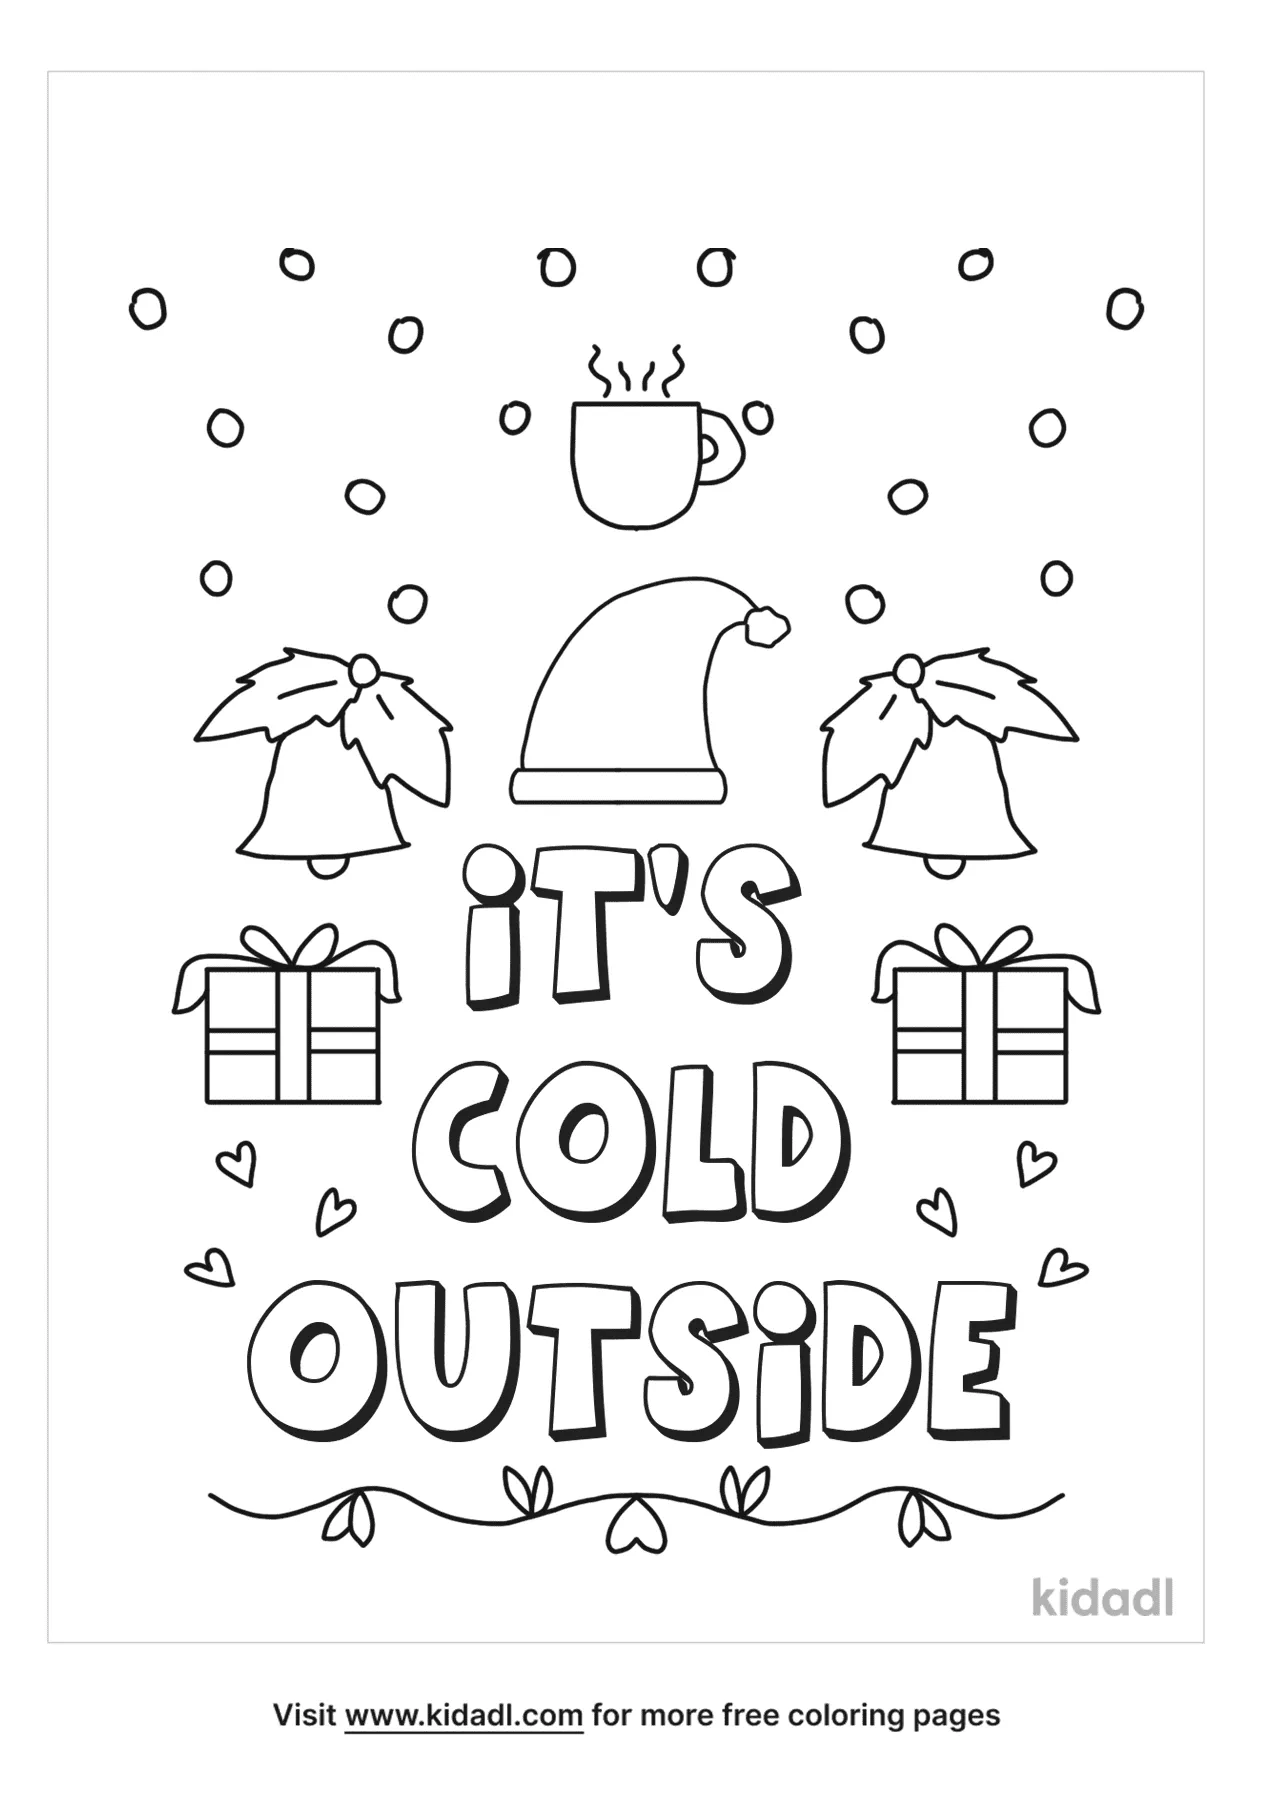 It's Cold Outside Coloring Page